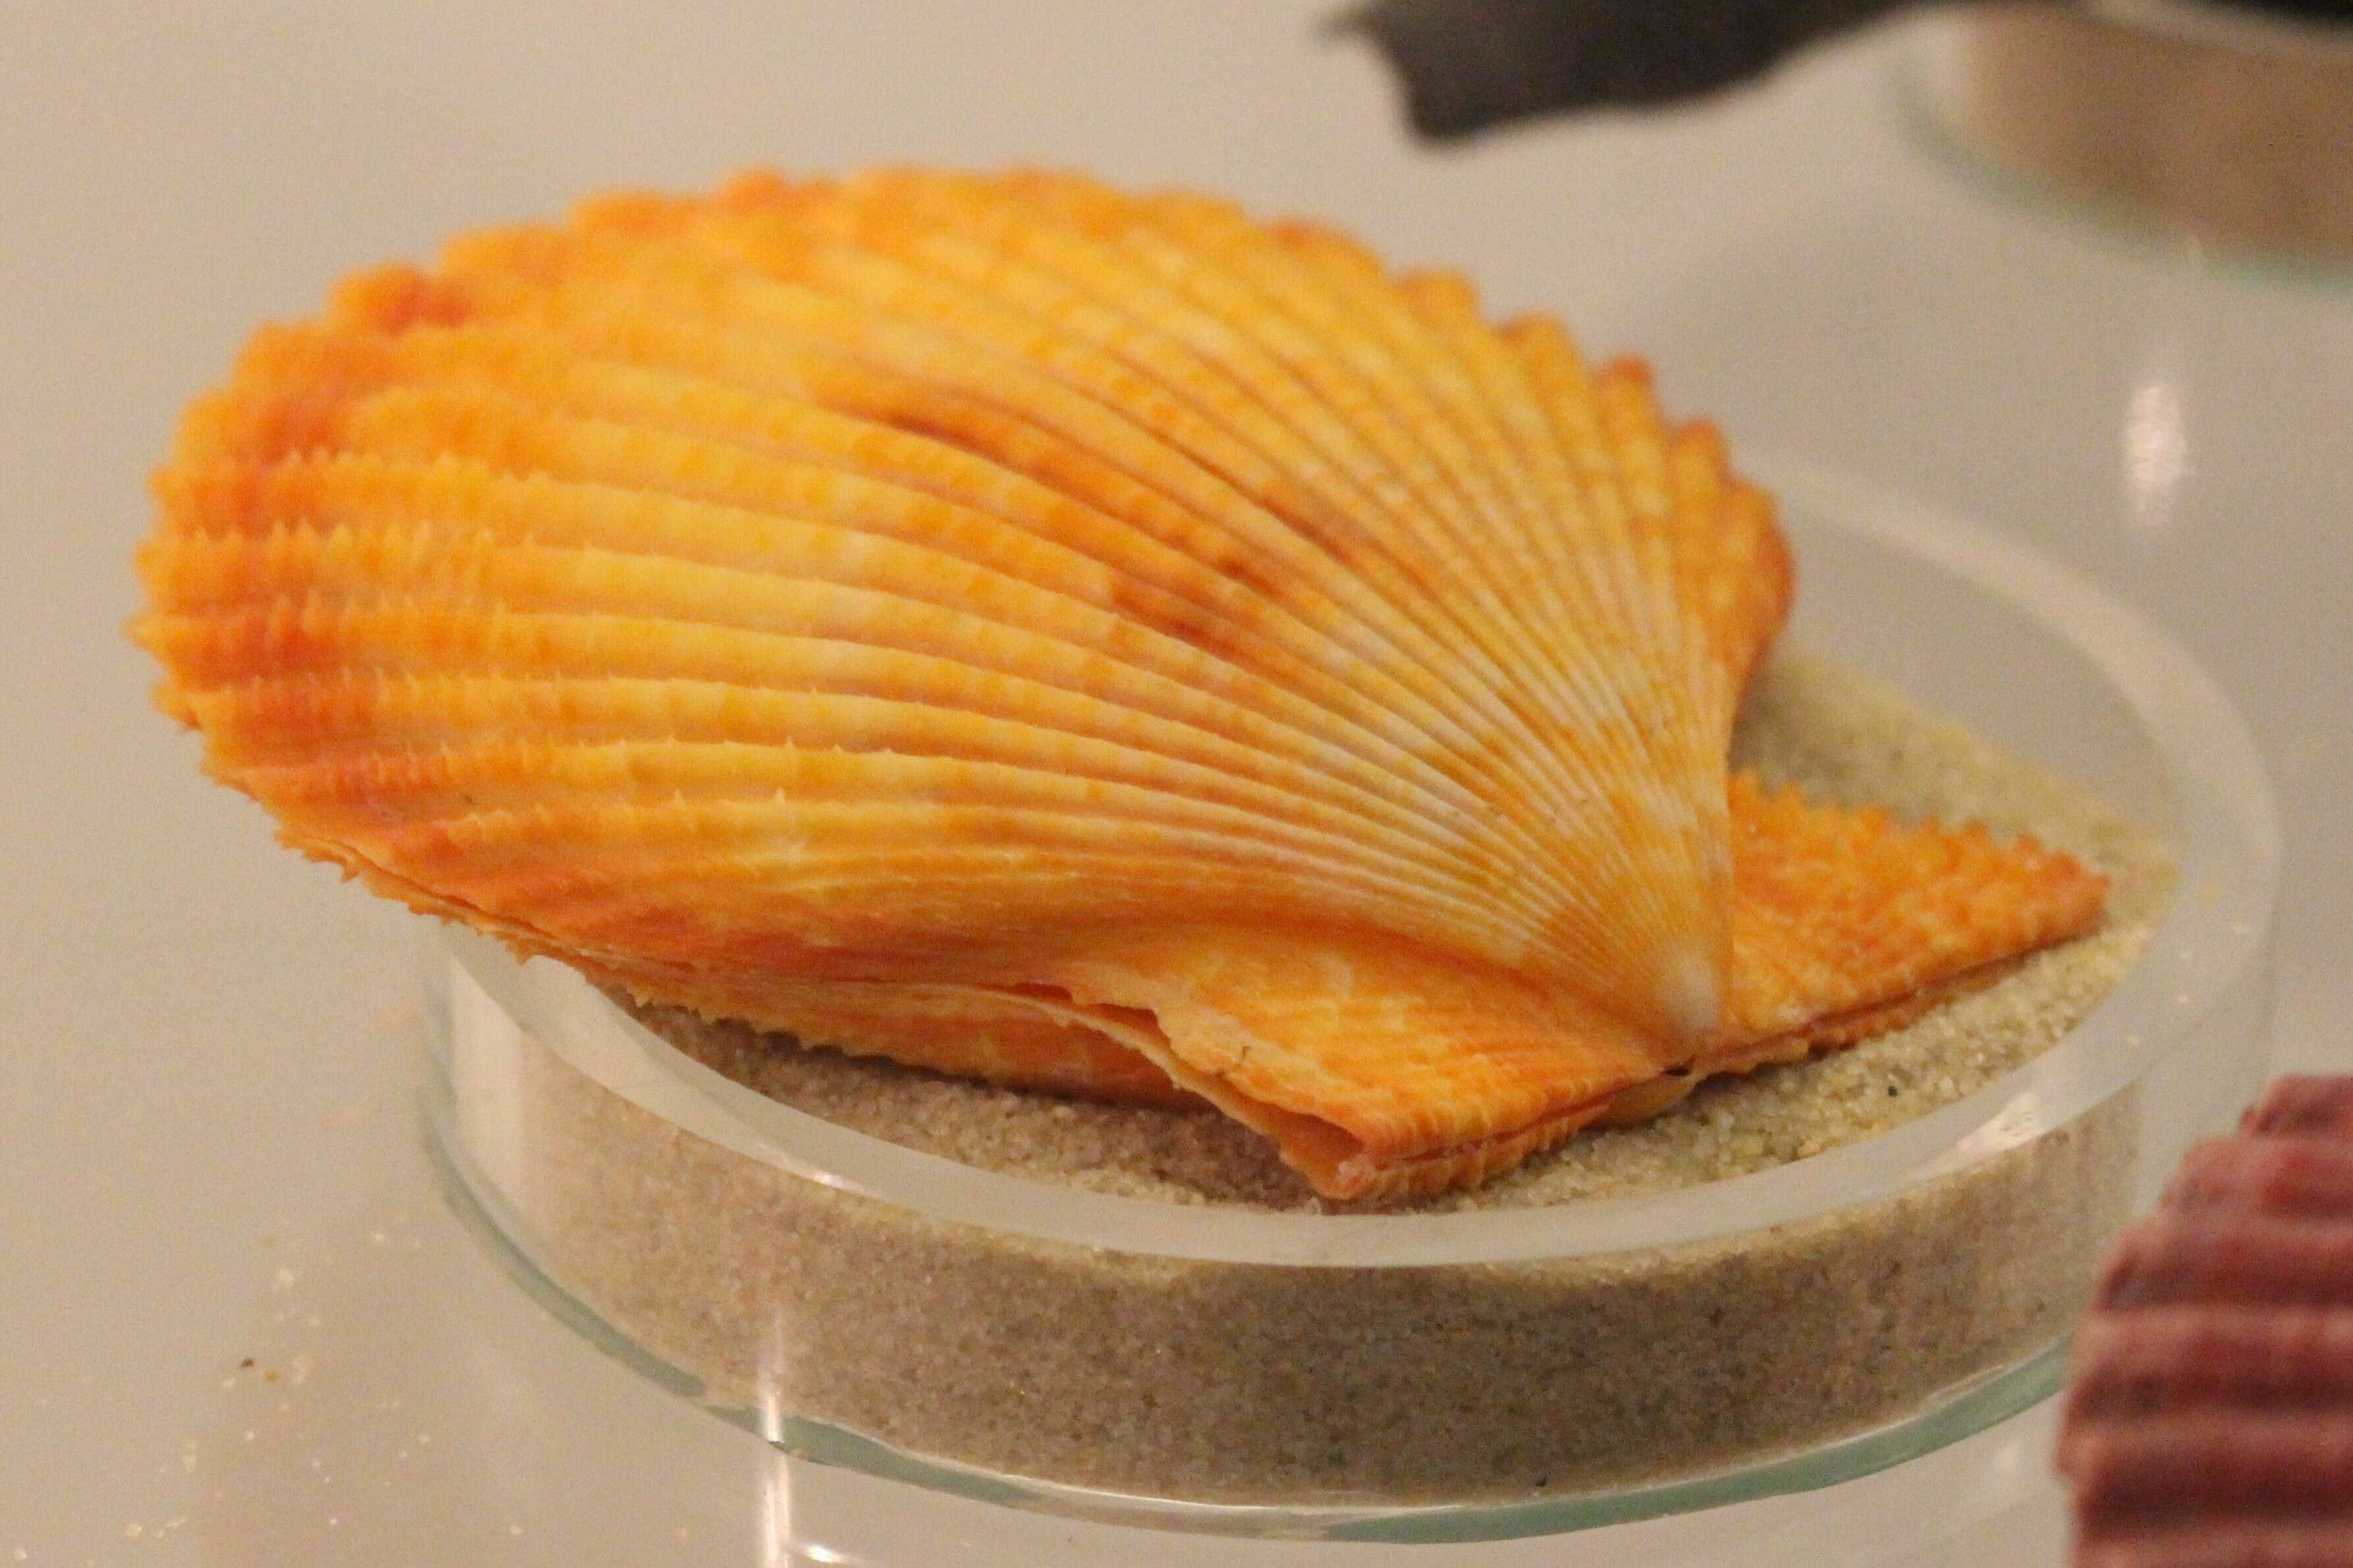 Image of noble scallop